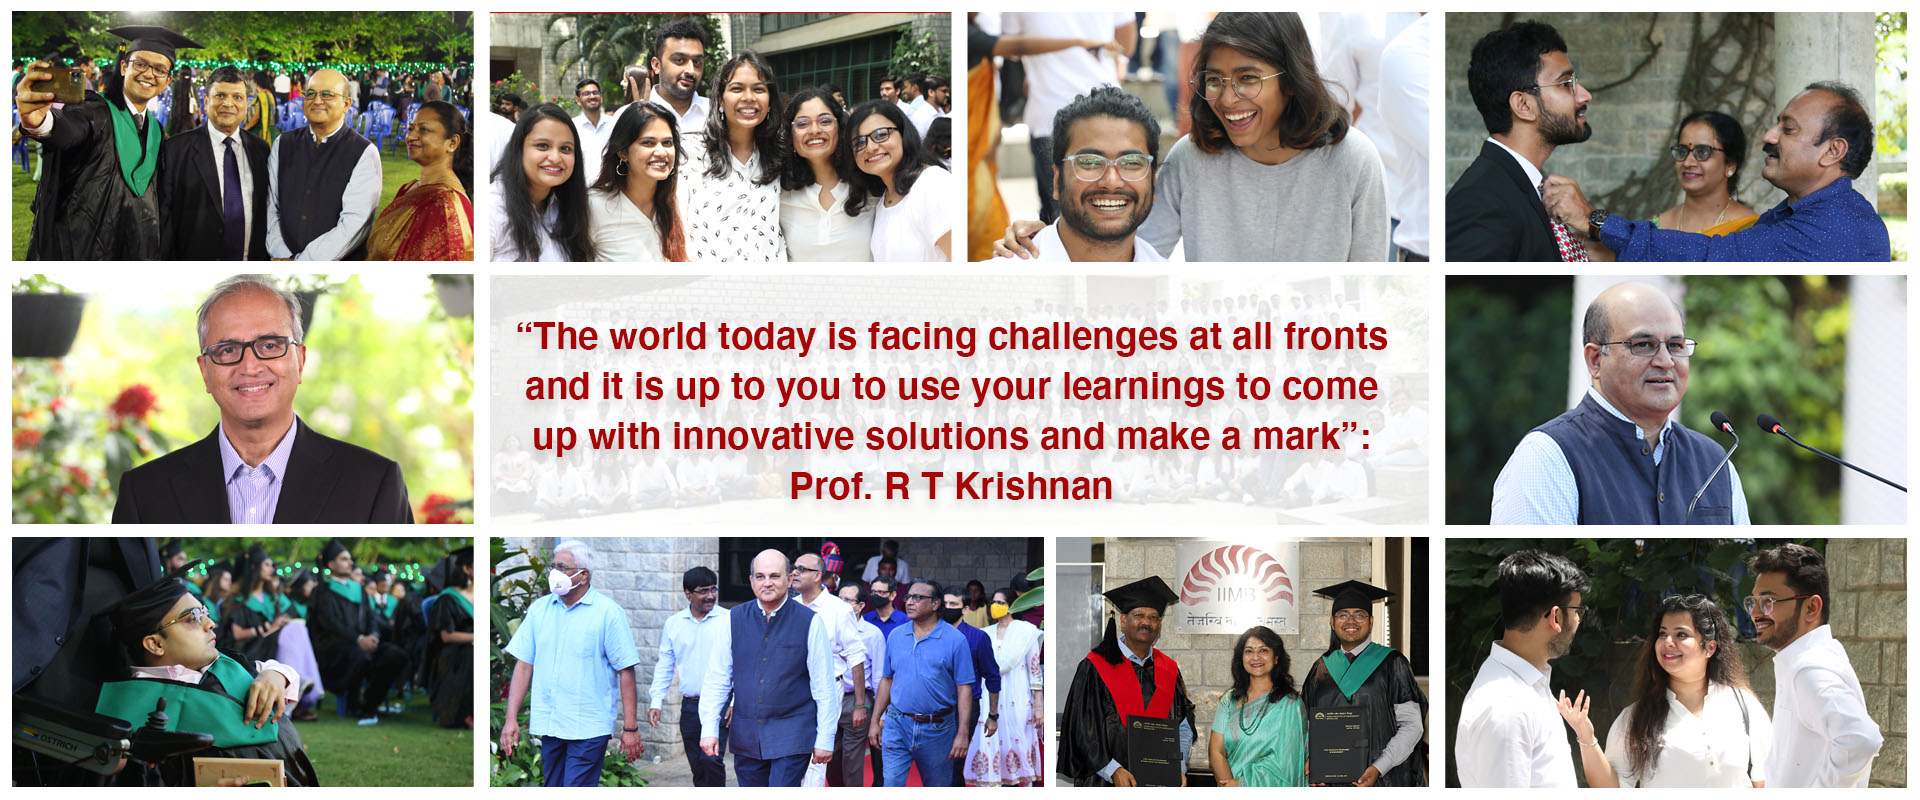 “The world today is facing challenges at all fronts and it is up to you to use your learnings to come up with innovative solutions and make a mark”: Prof. R T Krishnan